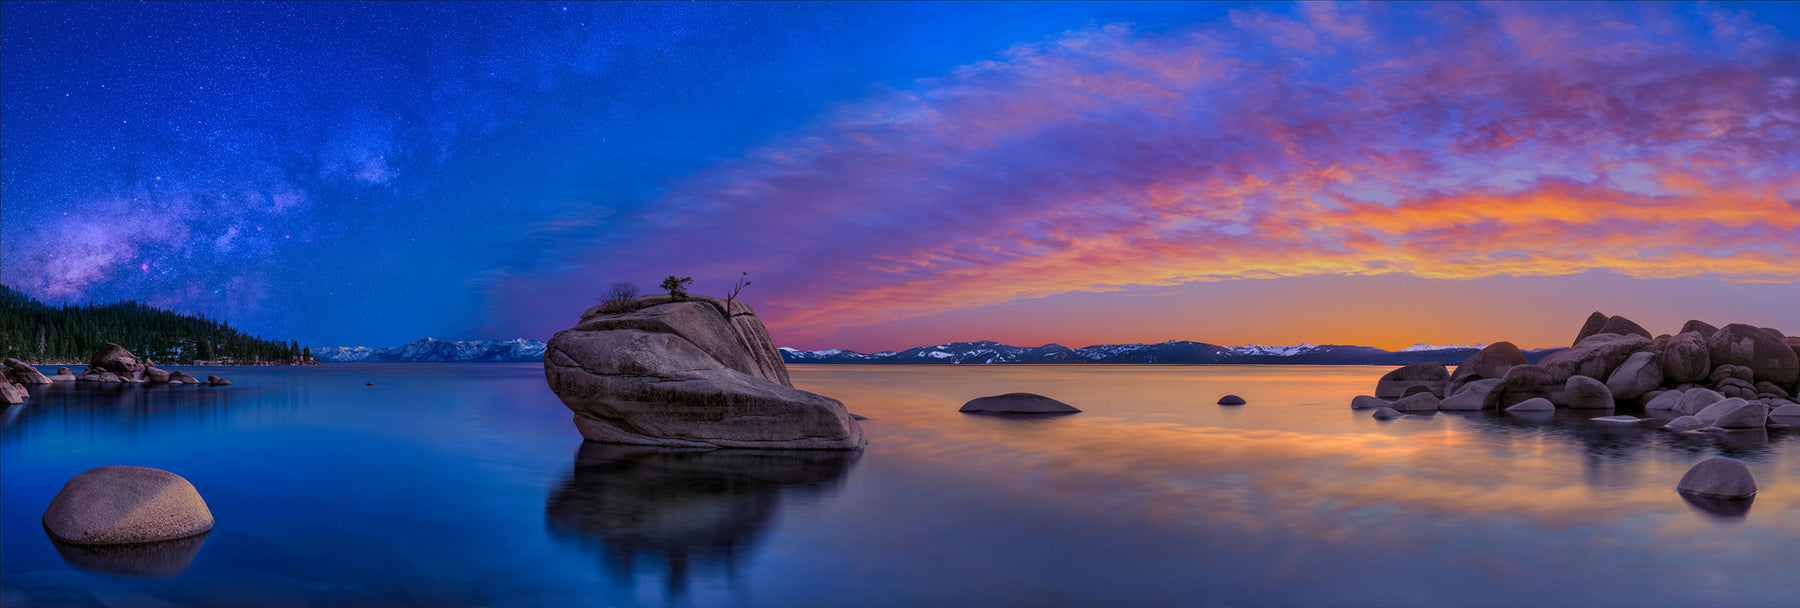 Peter Lik Photograph of Bonzai Rock in Lake Tahoe, as the sun sets and the stars come alive. | LIK Fine Art